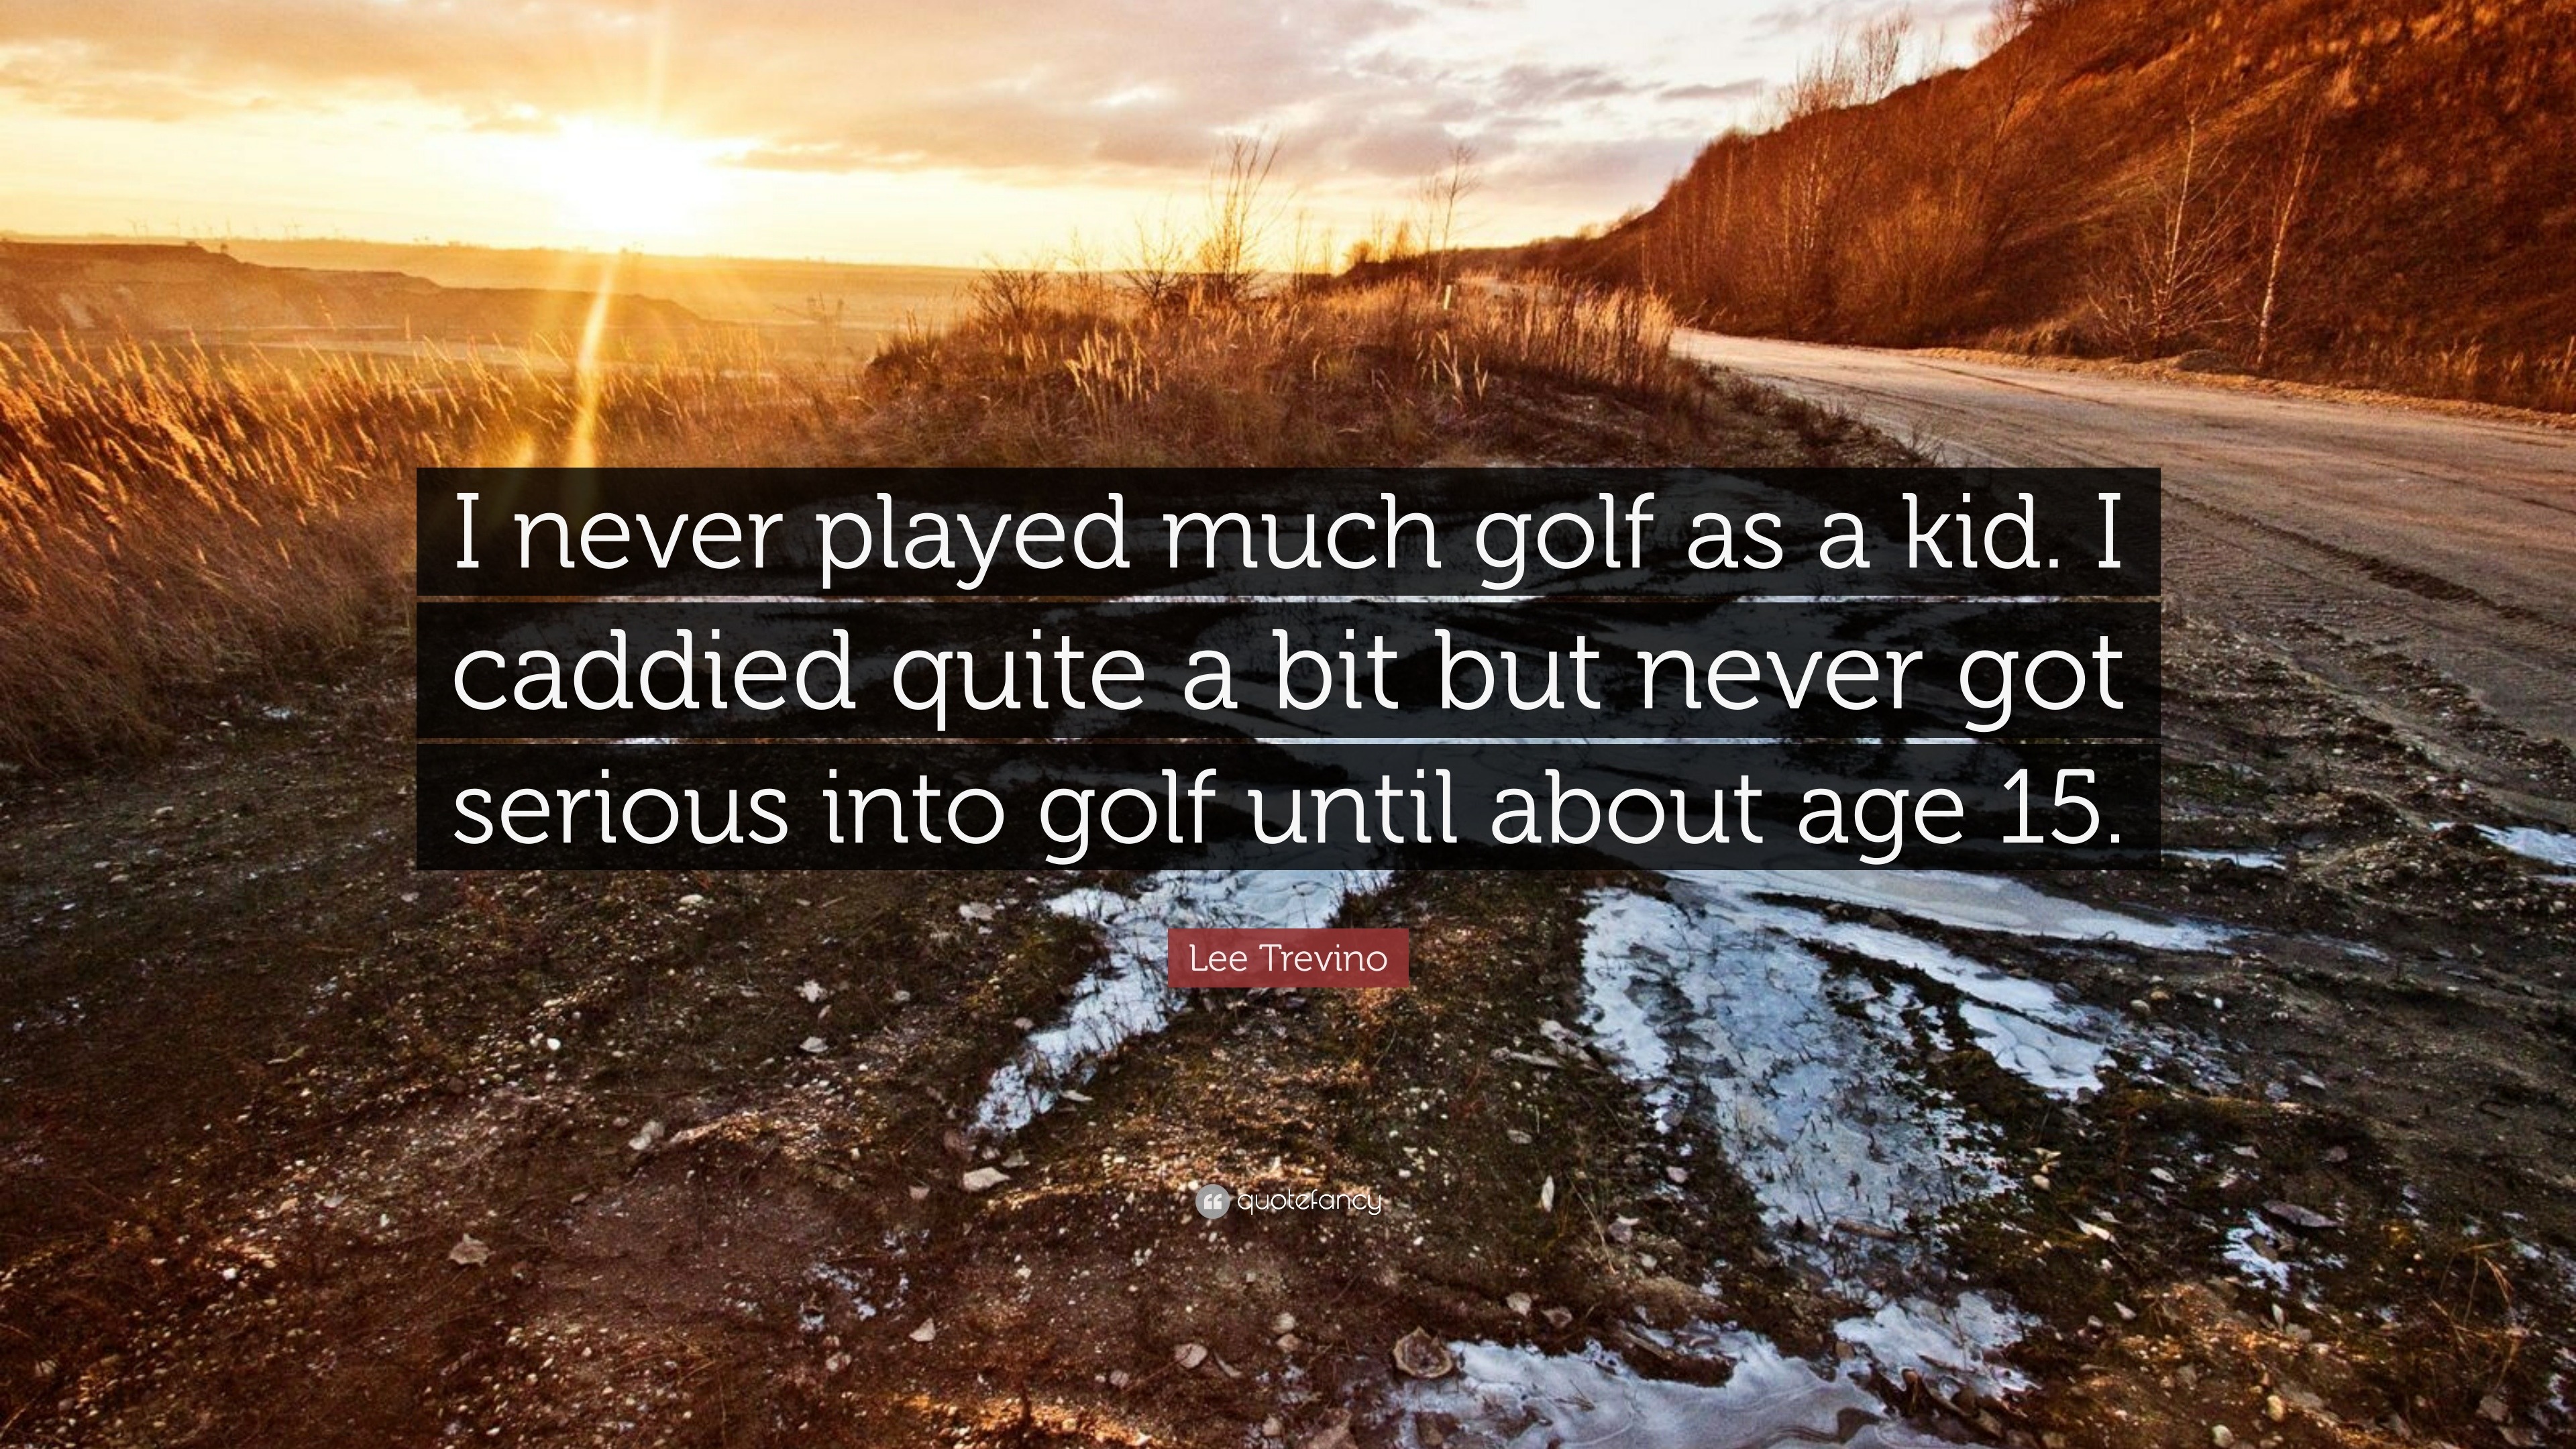 Lee Trevino Quote: “I never played much golf as a kid. I caddied quite a bit